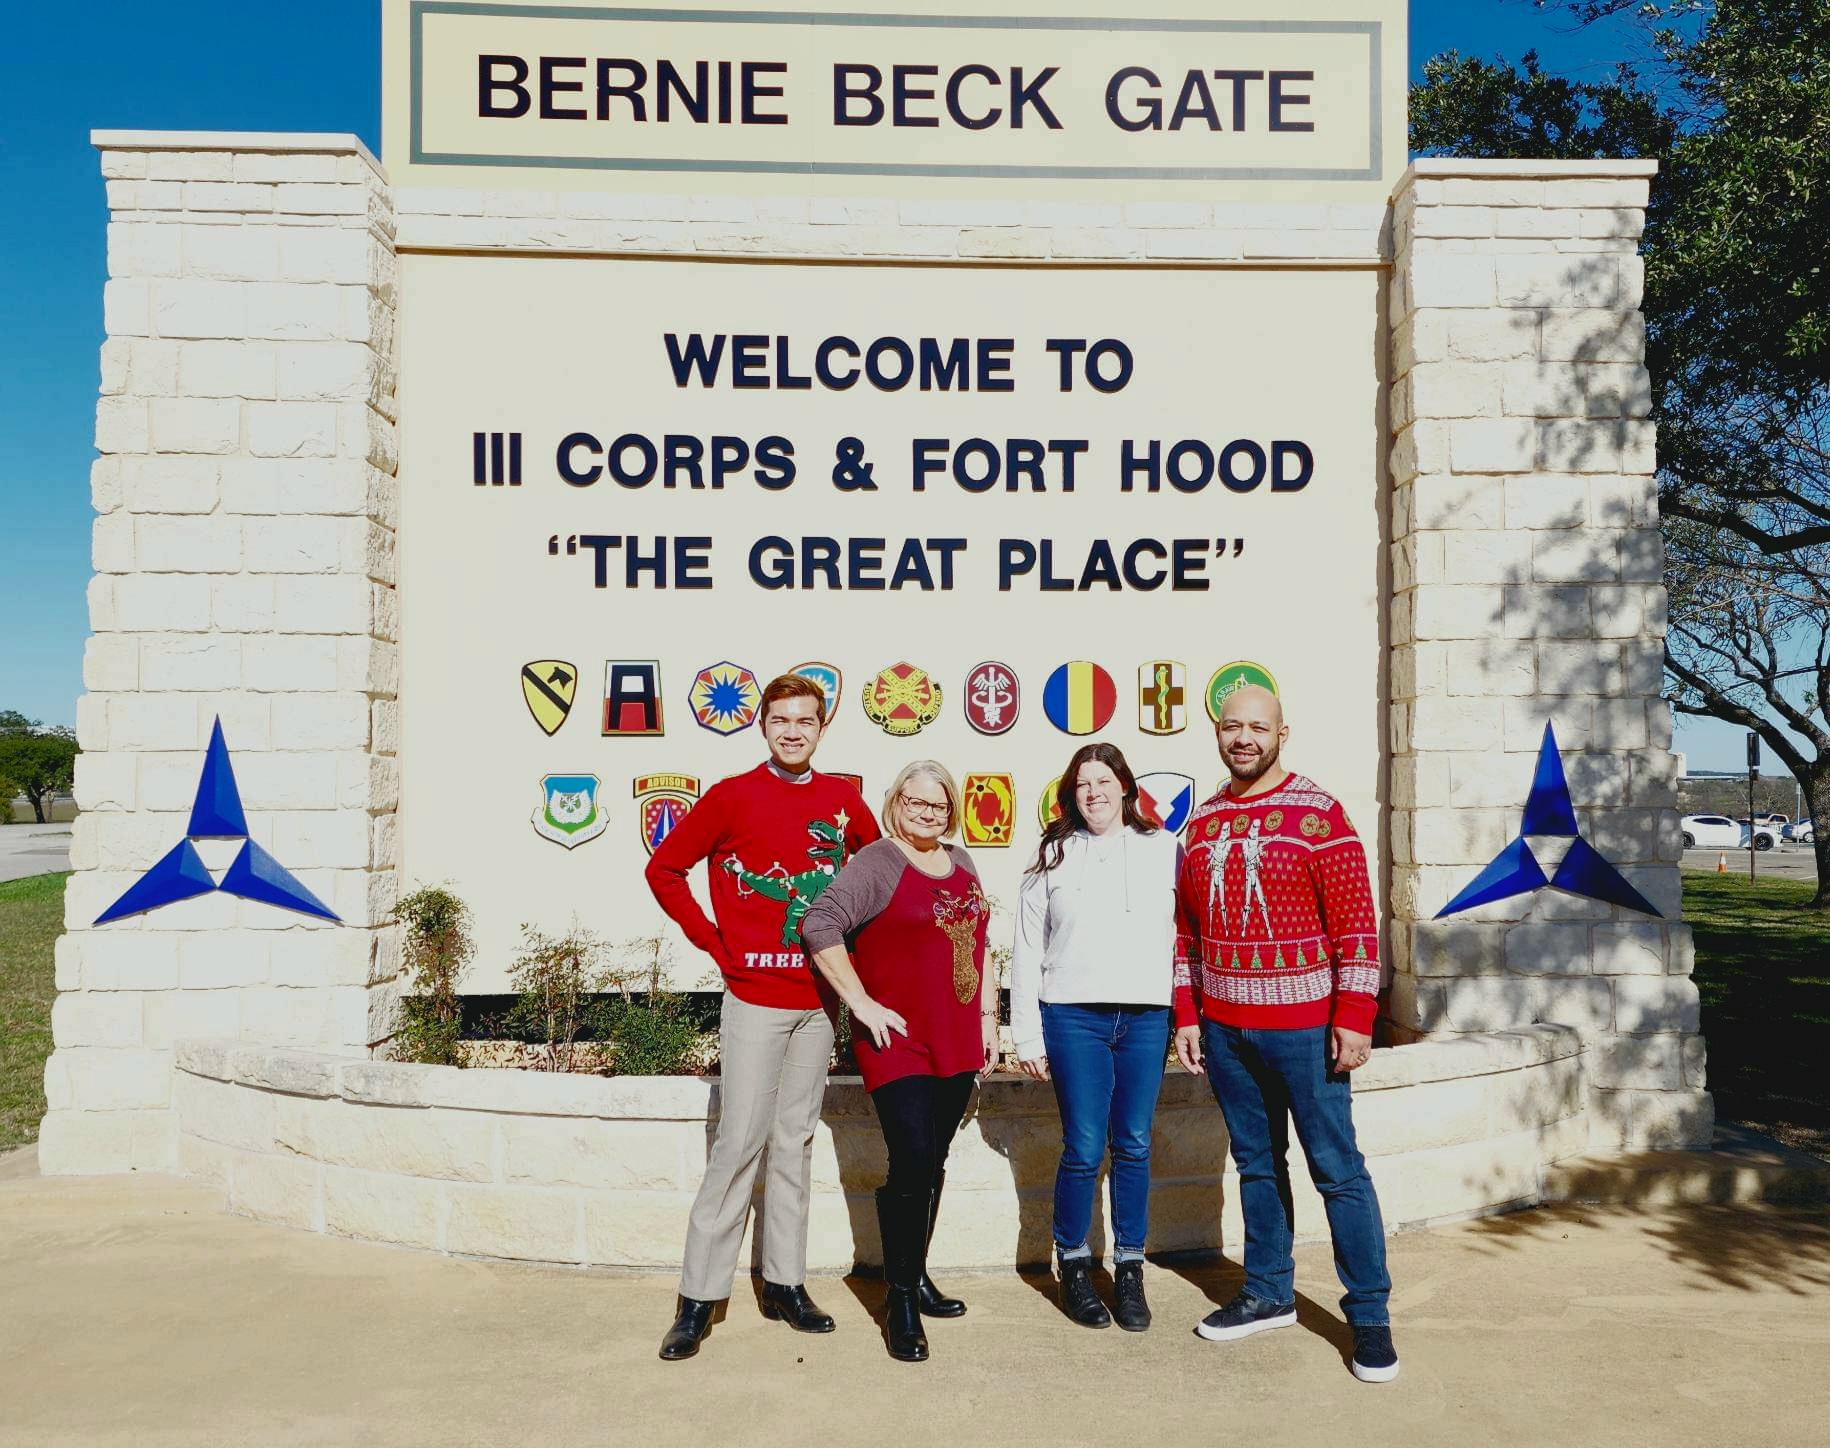 FedWriters employees in Christmas attire posing in front of the Bernie Beck Gate--Welcome to 3rd Corps and Fort Hood, 